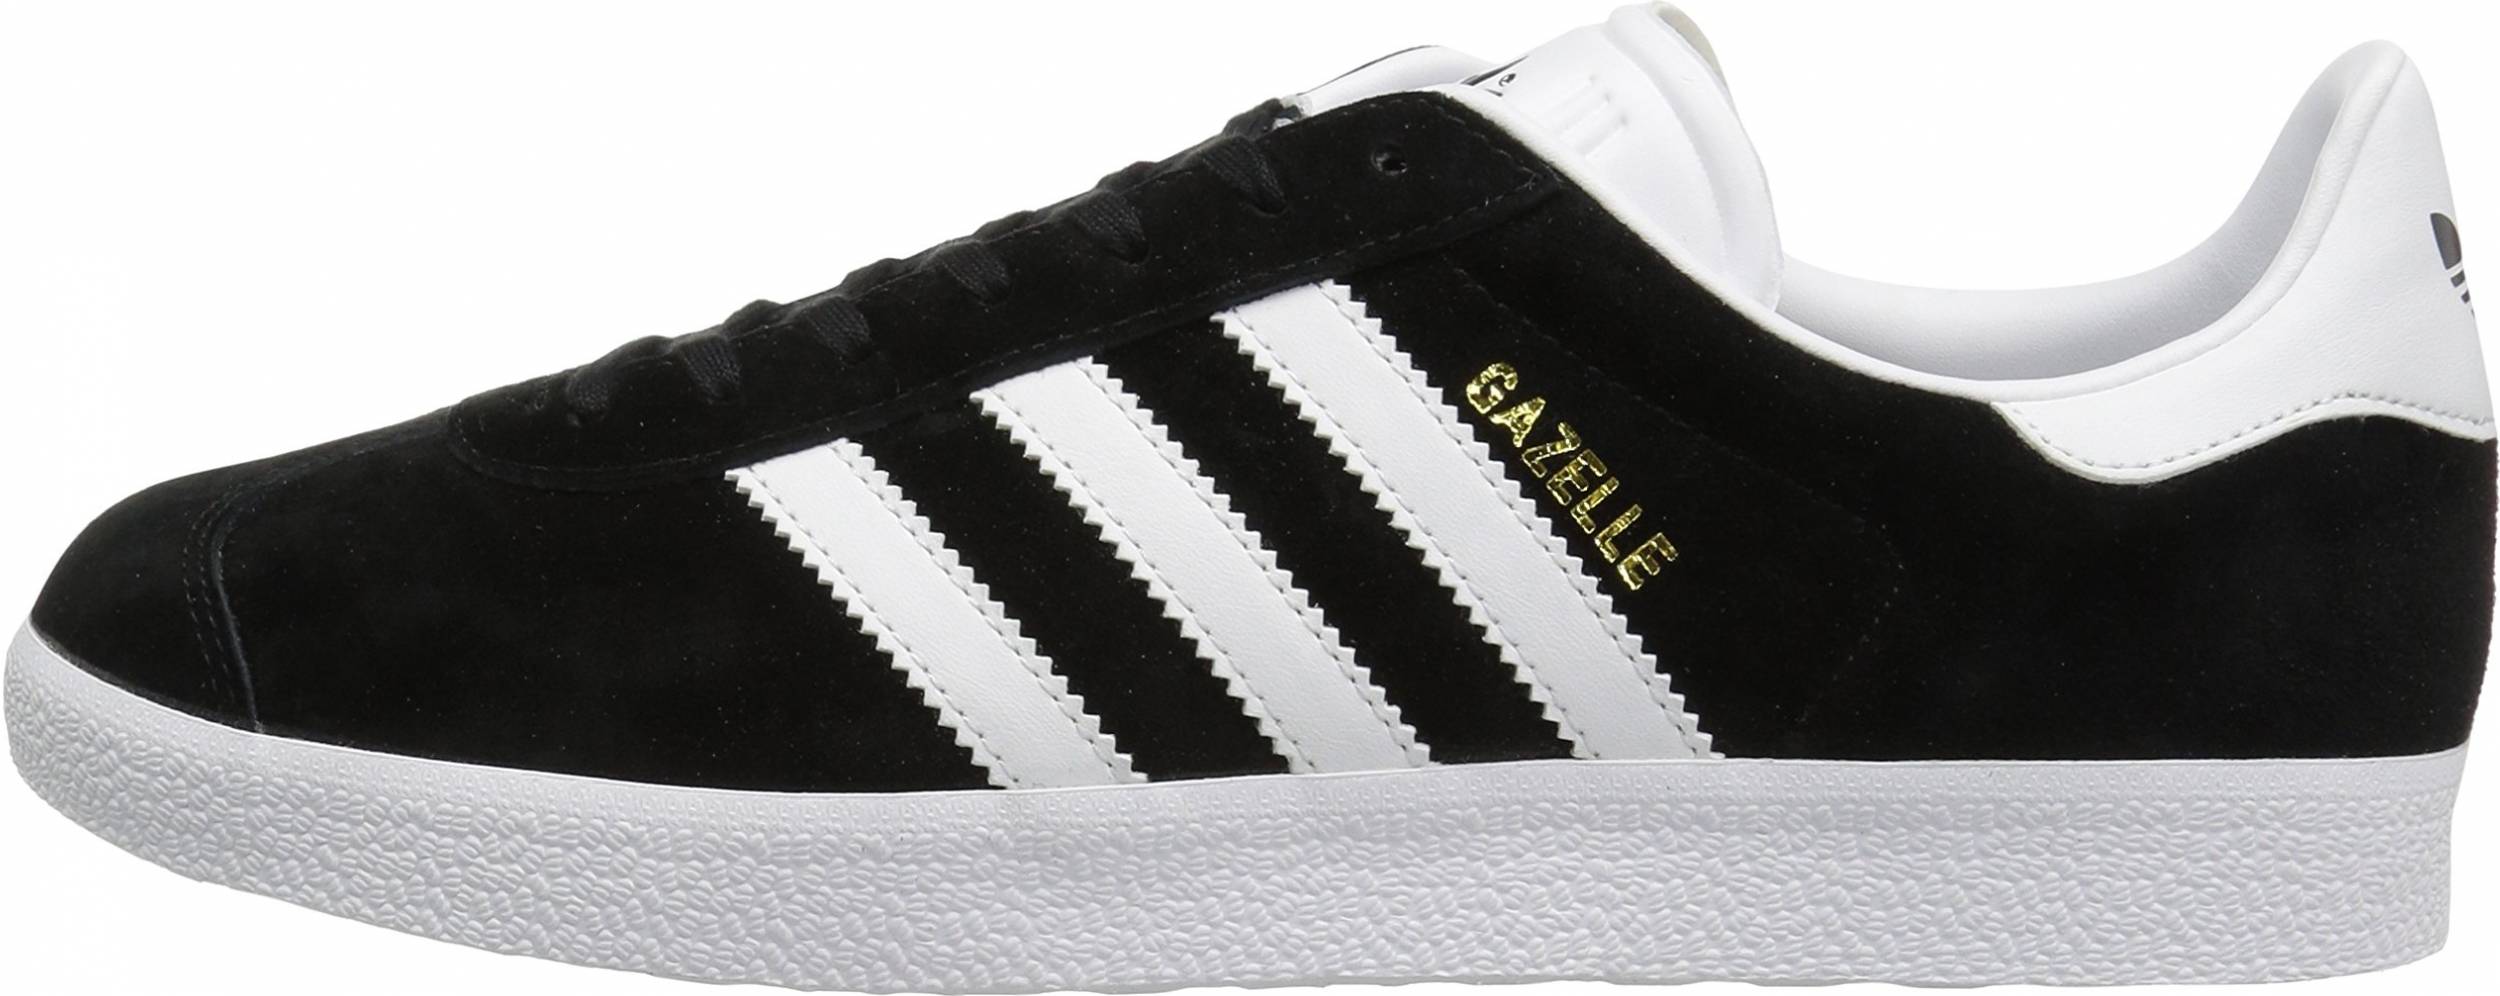 Adidas Gazelle sneakers in 50+ colors (only $46) | RunRepeat طبخ ذبايح